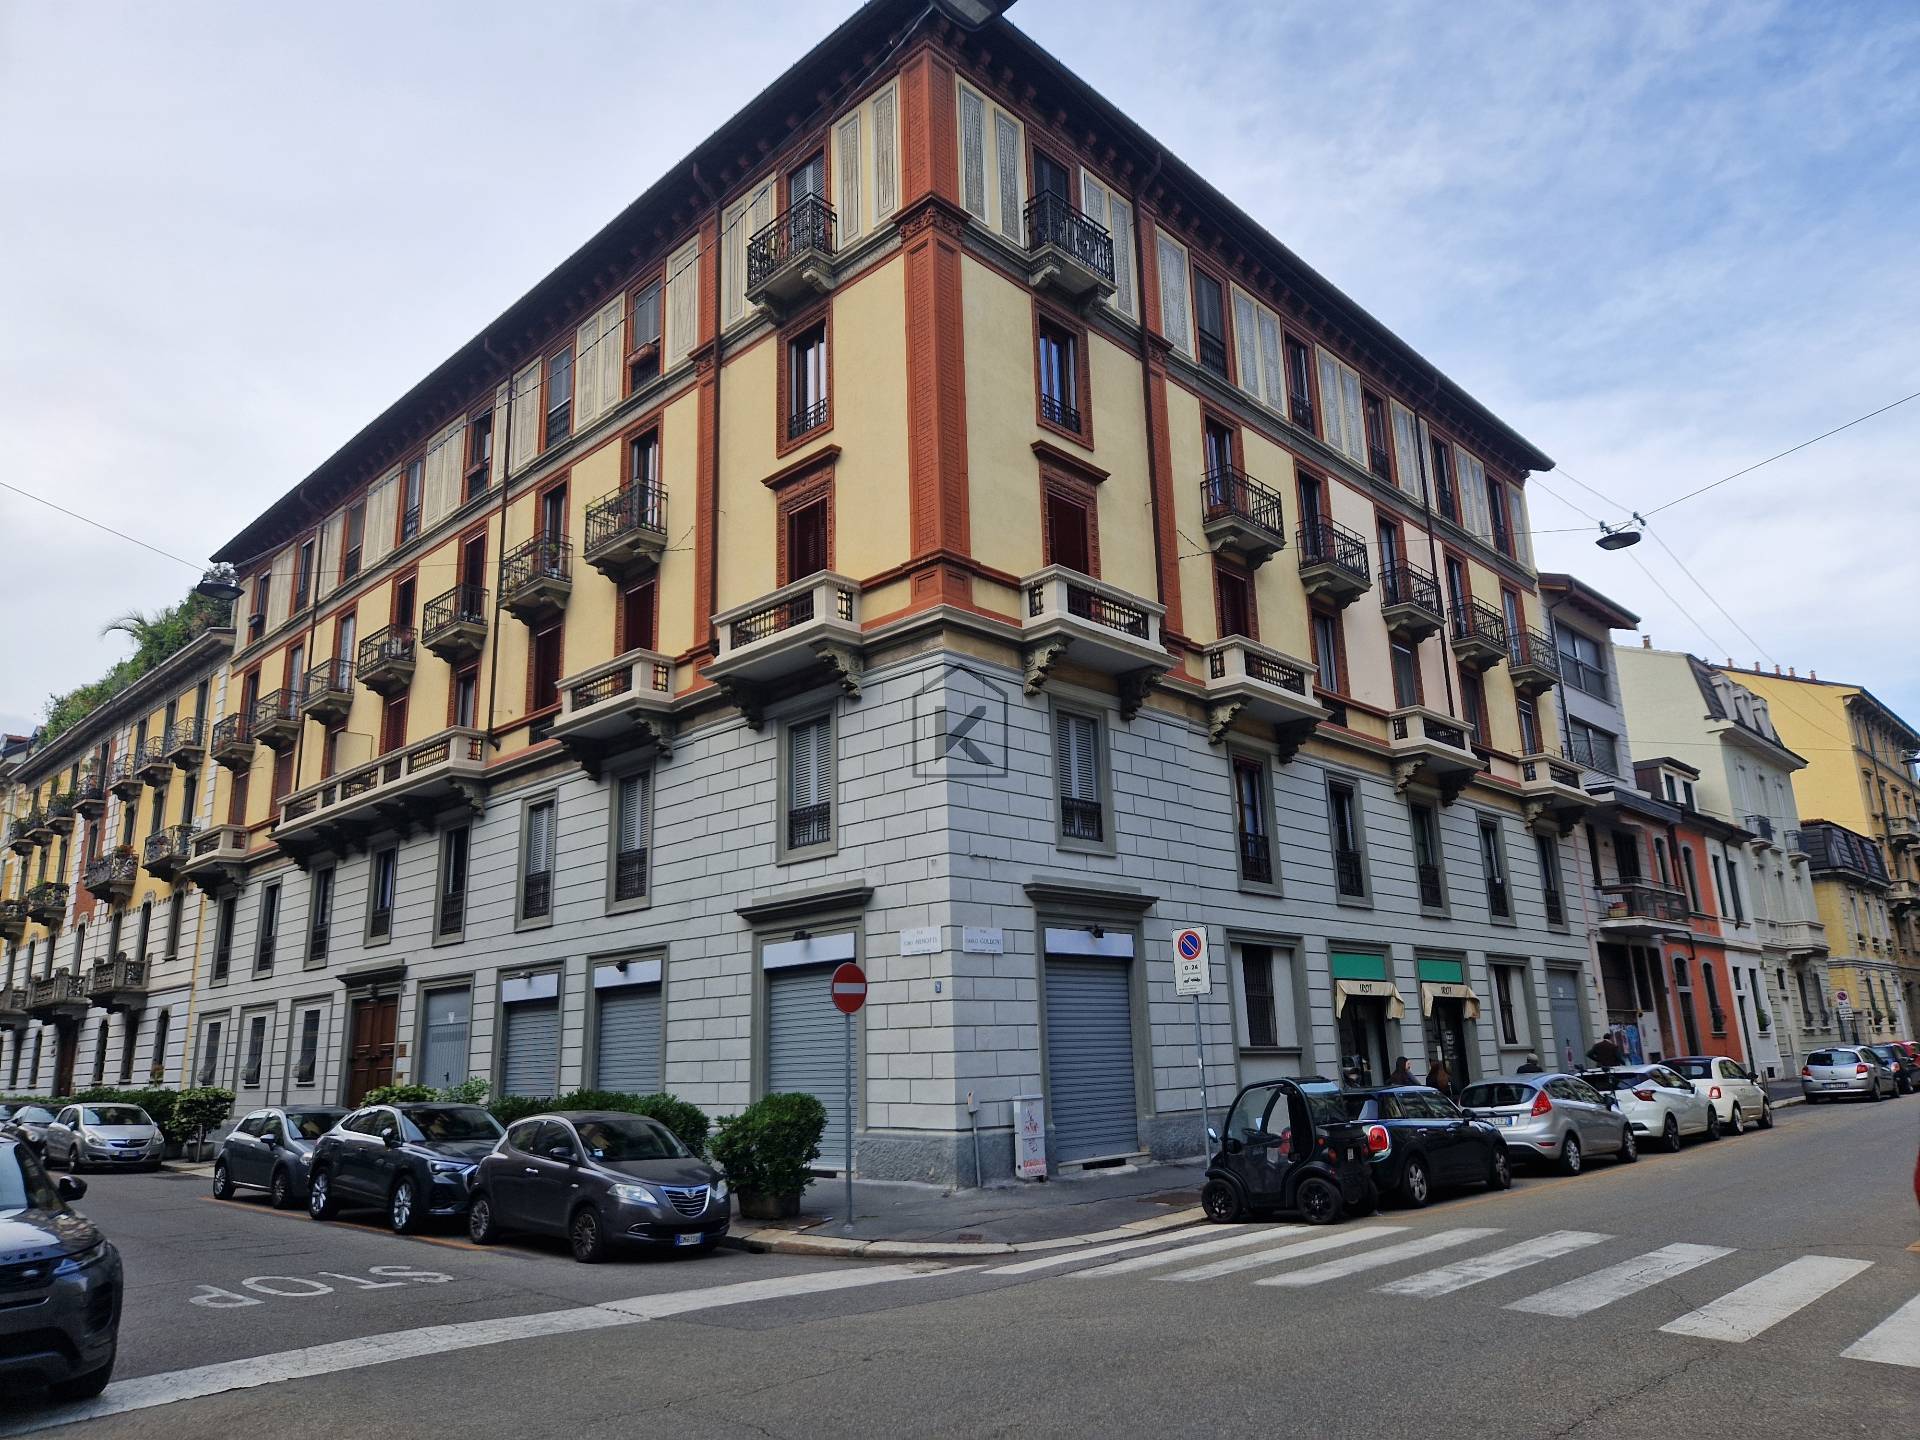 Locale commerciale in affitto, Milano indipendenza